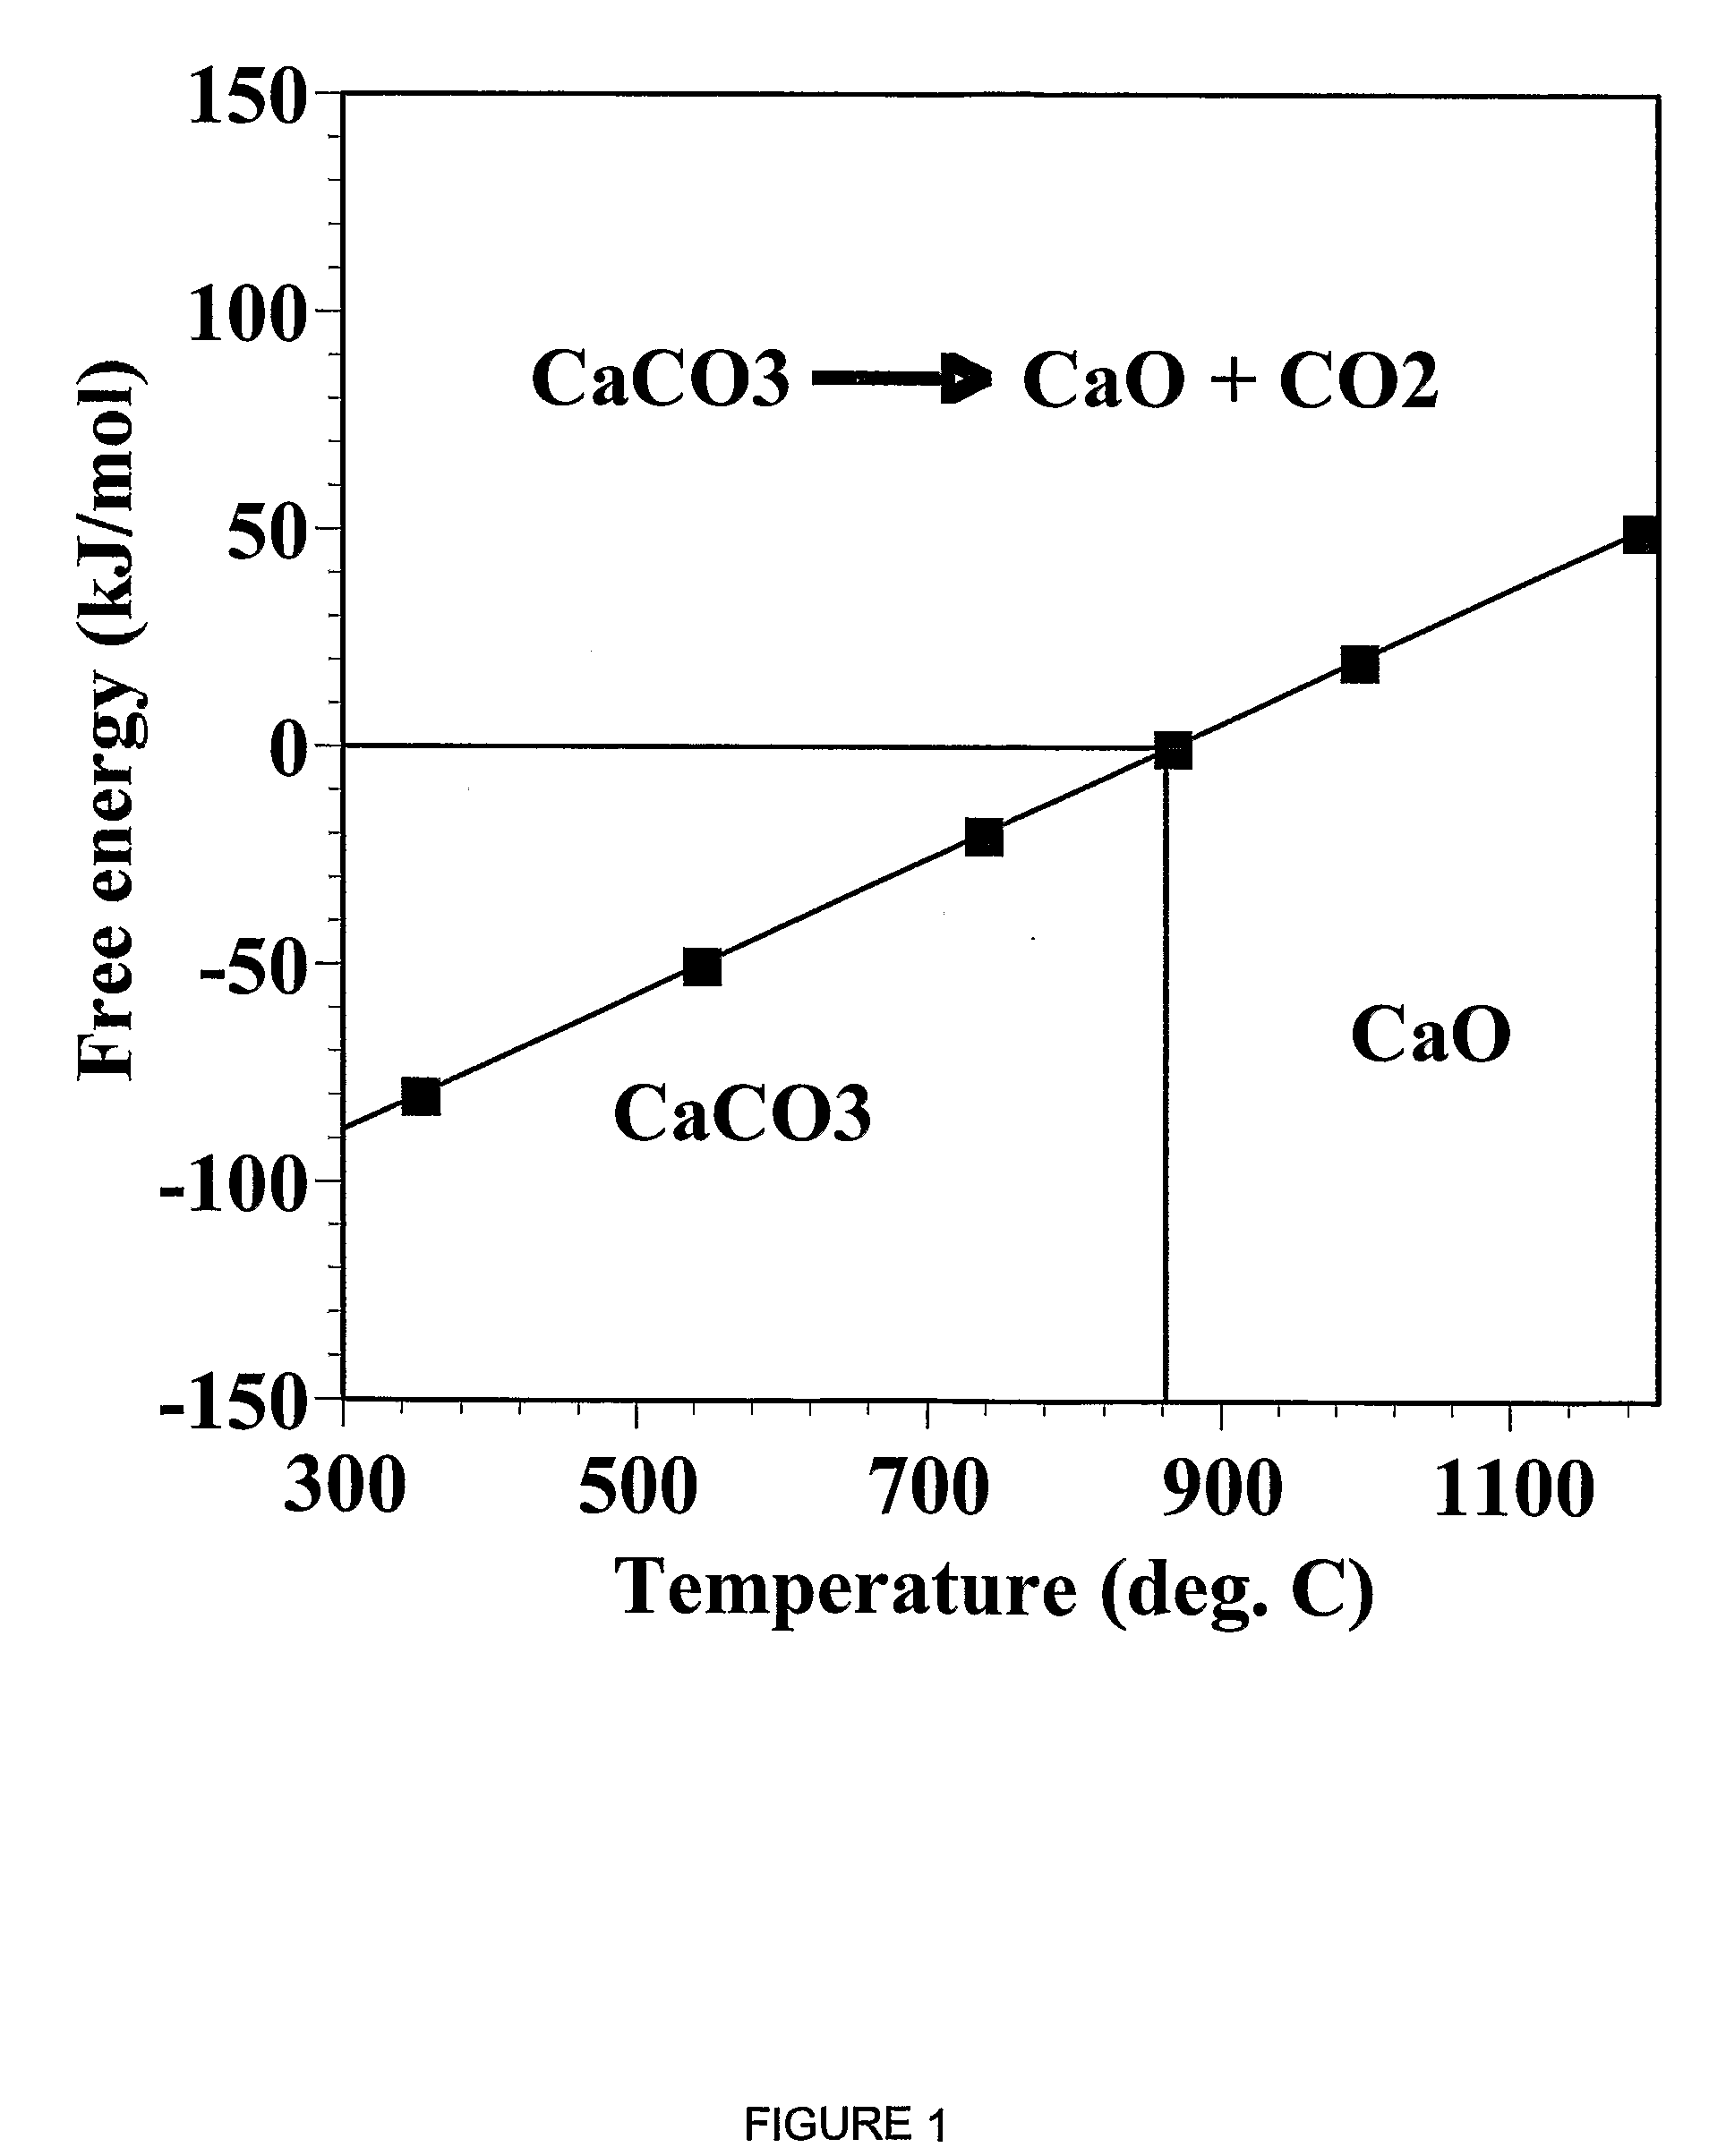 Separation of Carbon Dioxide (Co2) From Gas Mixtures By Calcium Based Reaction Separation (Cars-Co2) Process